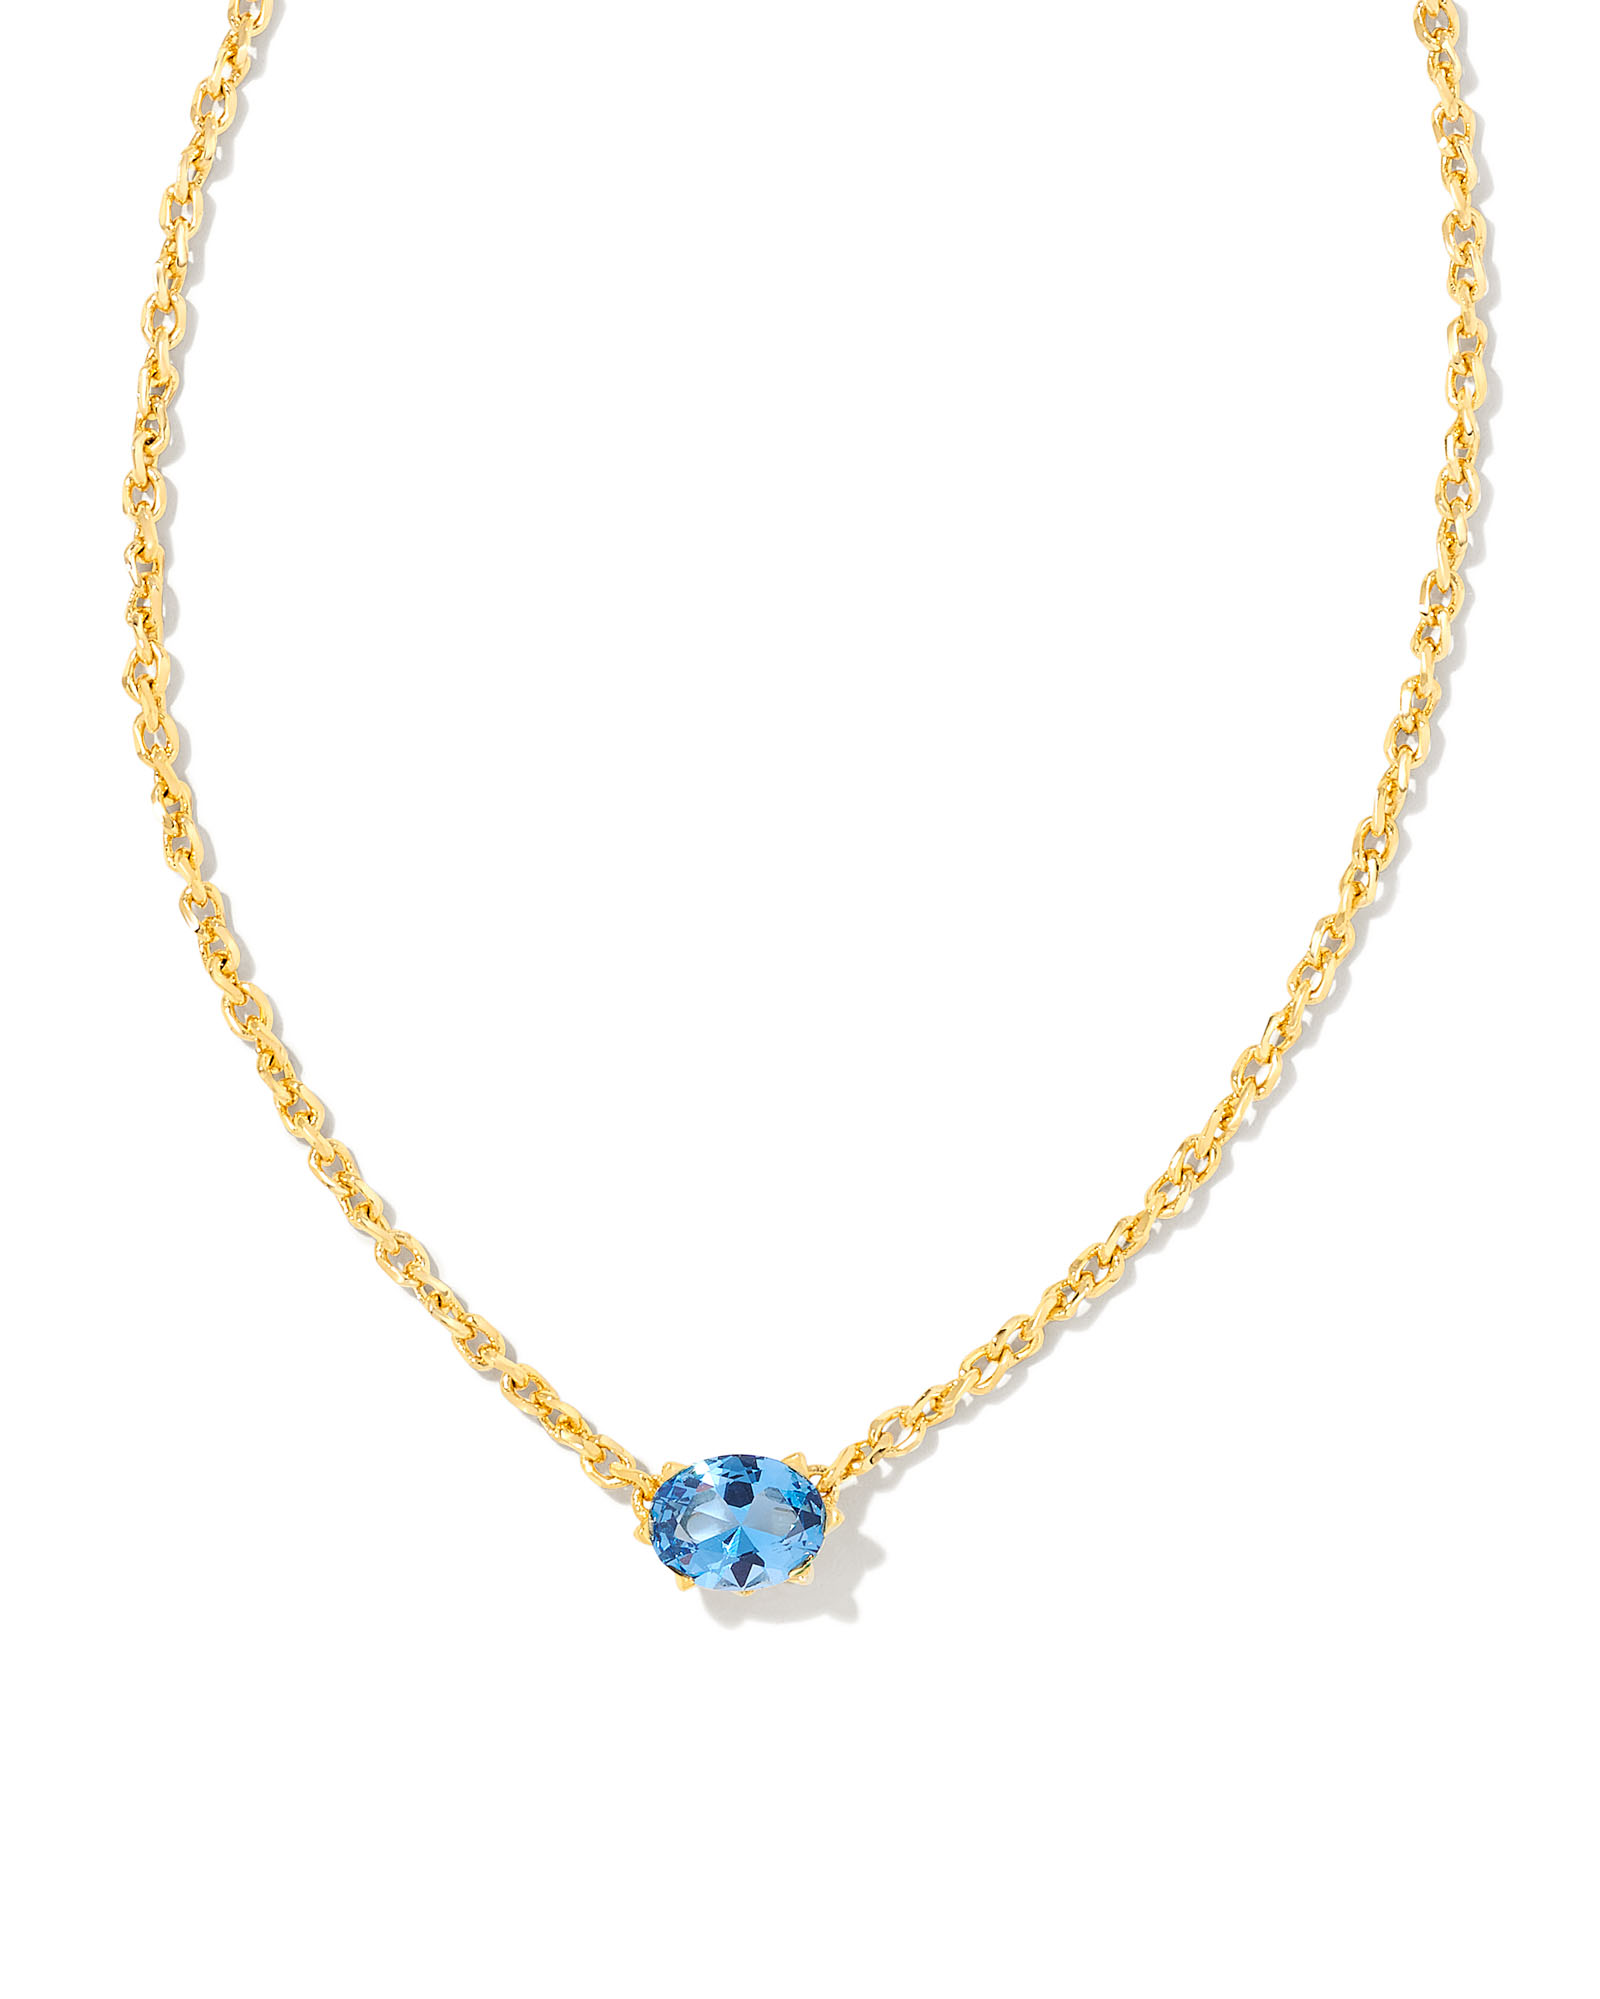 Cailin Gold Pendant Necklace in Blue Violet Crystal | Kendra Scott